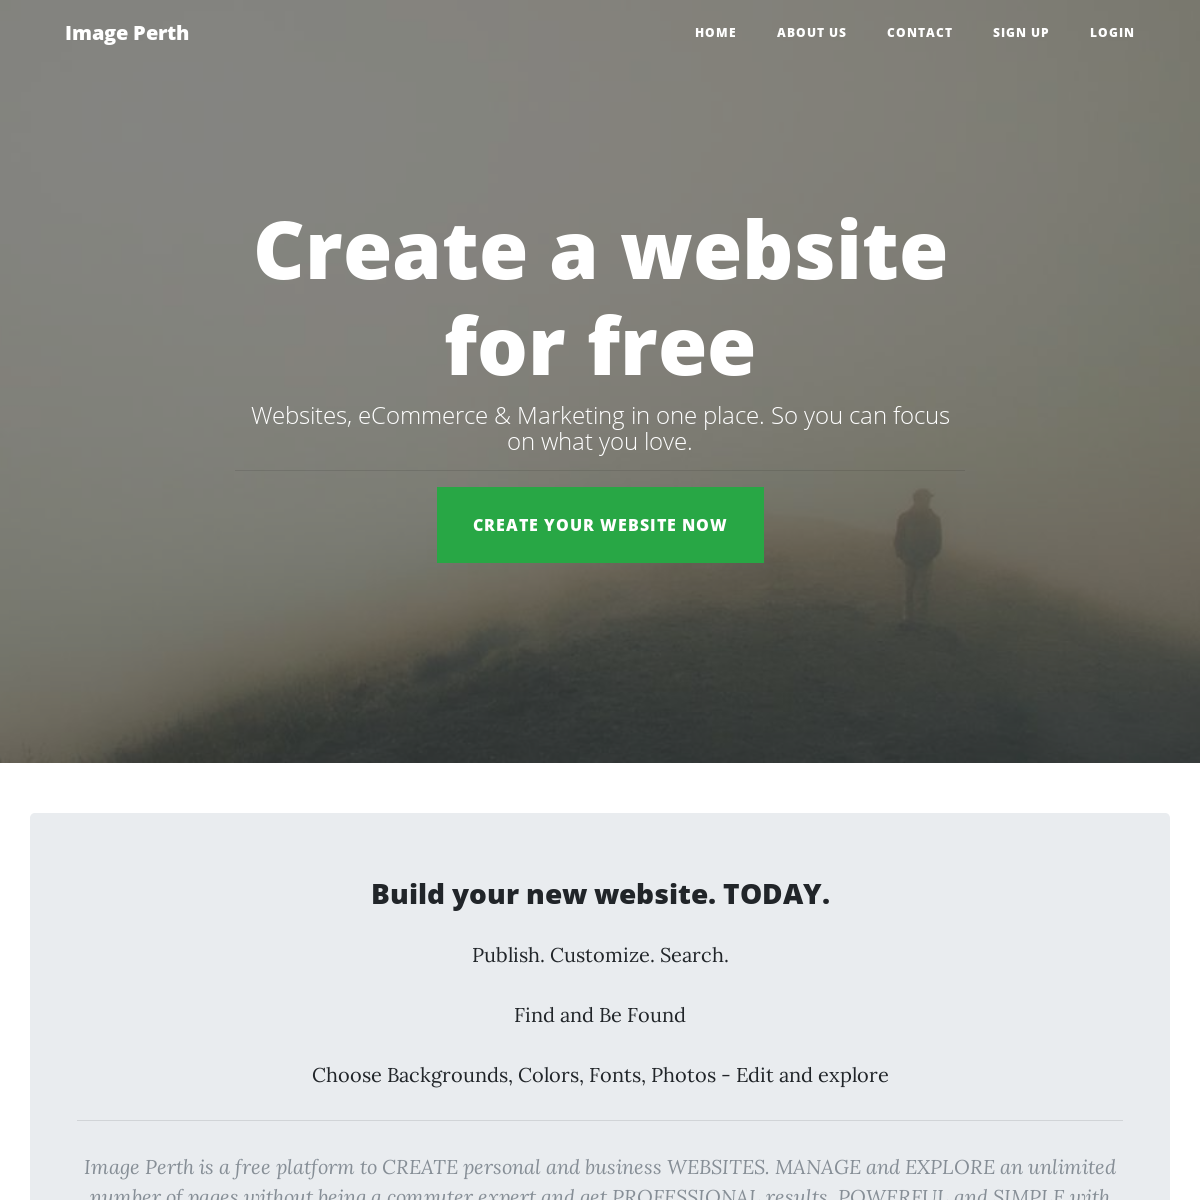 Create a website for free - Image Perth